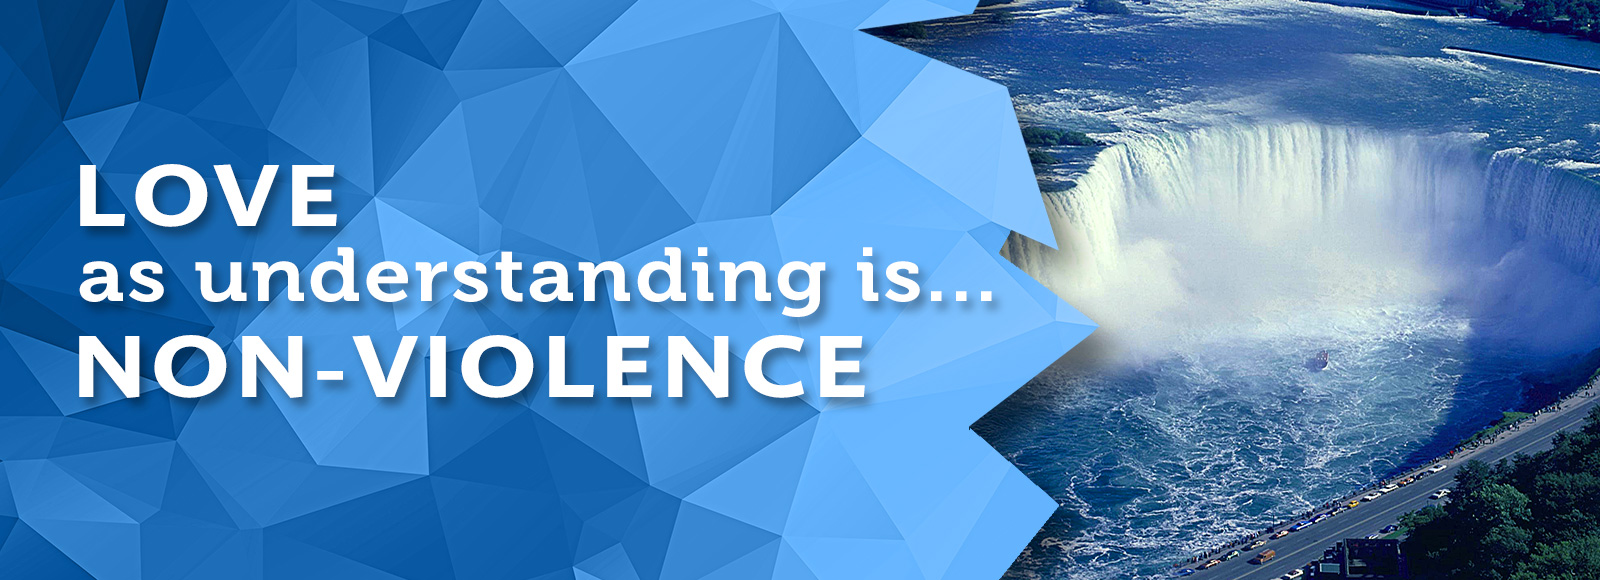 Love as understanding is Non-violence.